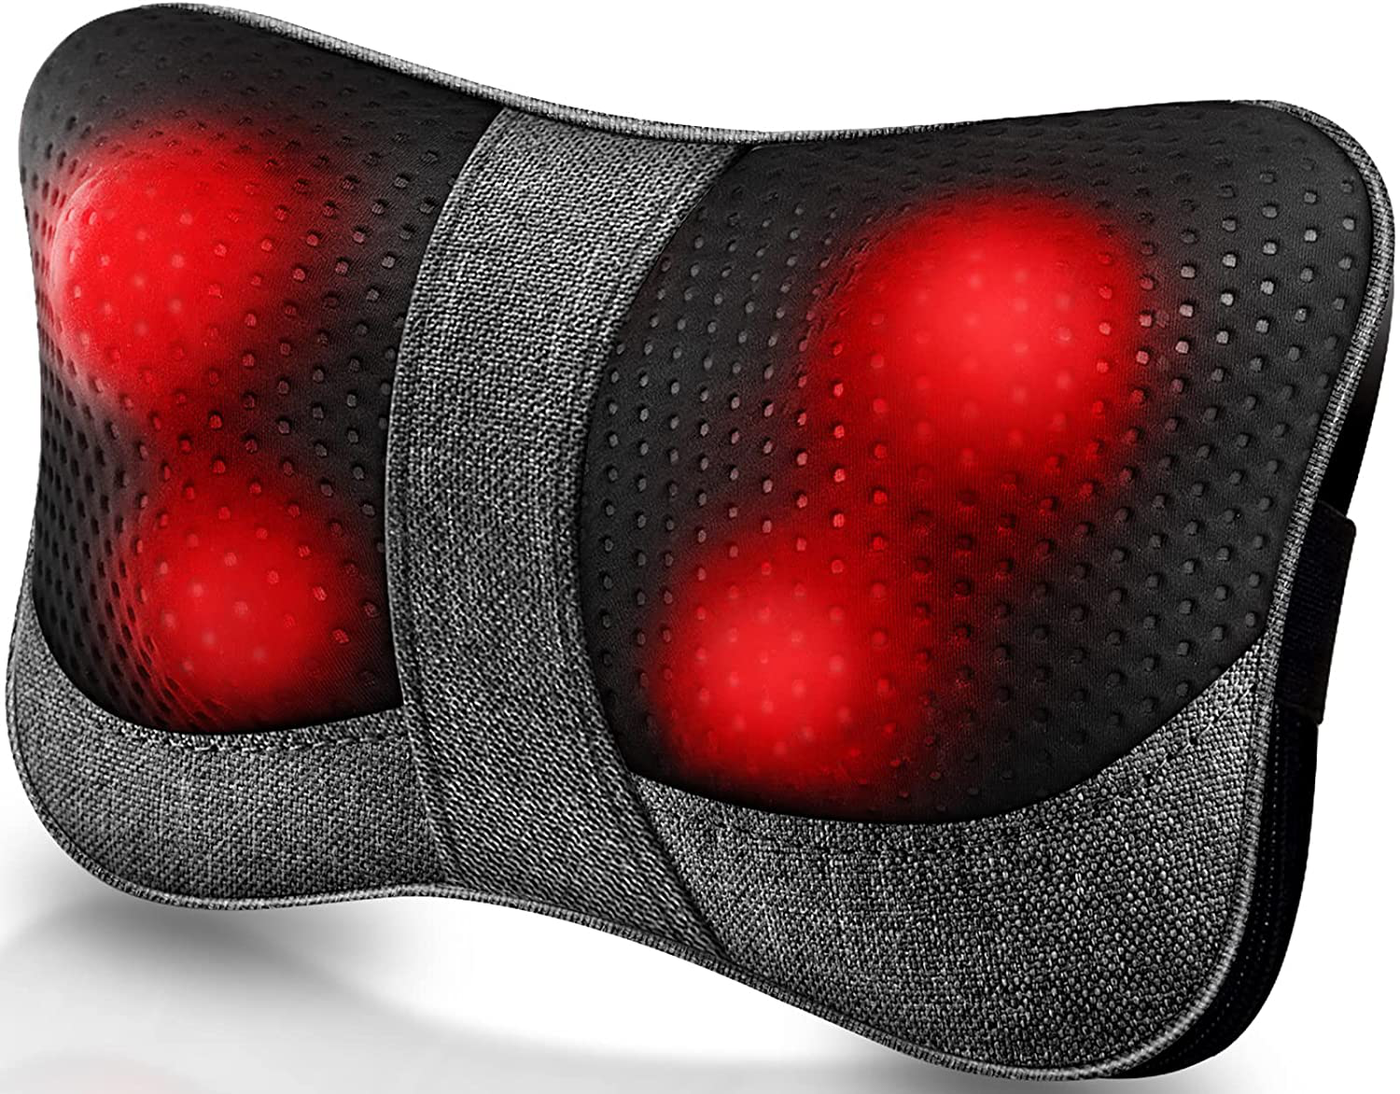 Neck and Back Massager Pillow, Shiatsu Kneading Massage with Heat for Shoulders, Lower Back, Waist, Legs, Foot and Full Body Muscle Pain Relief, VIKTOR JURGEN Unique Gifts for Men, Women